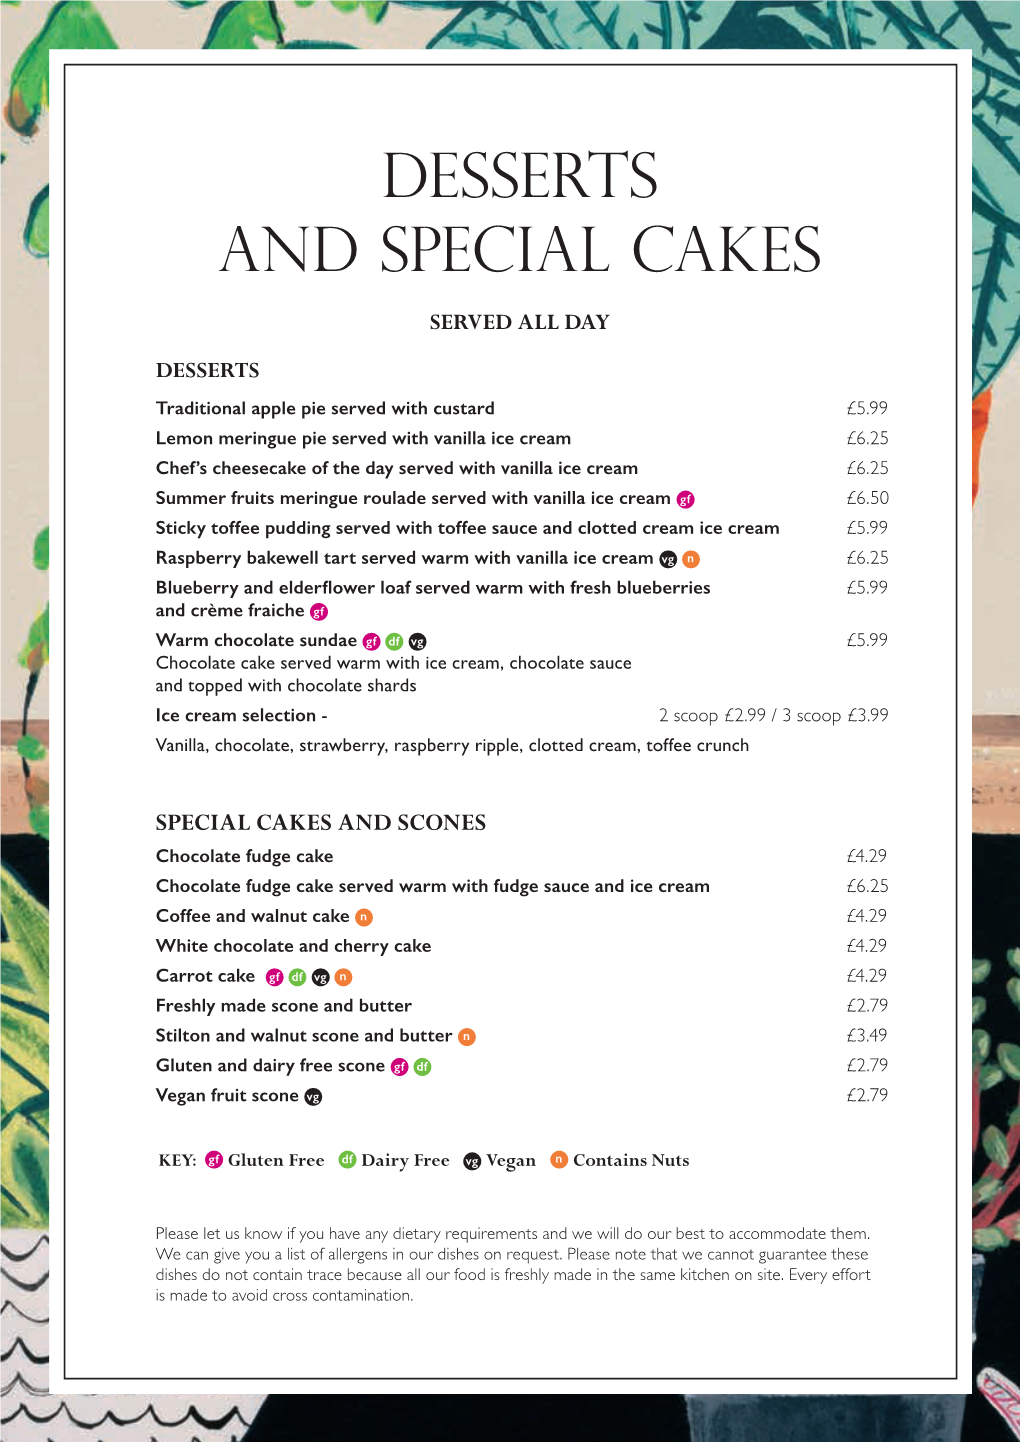 Desserts and Special Cakes